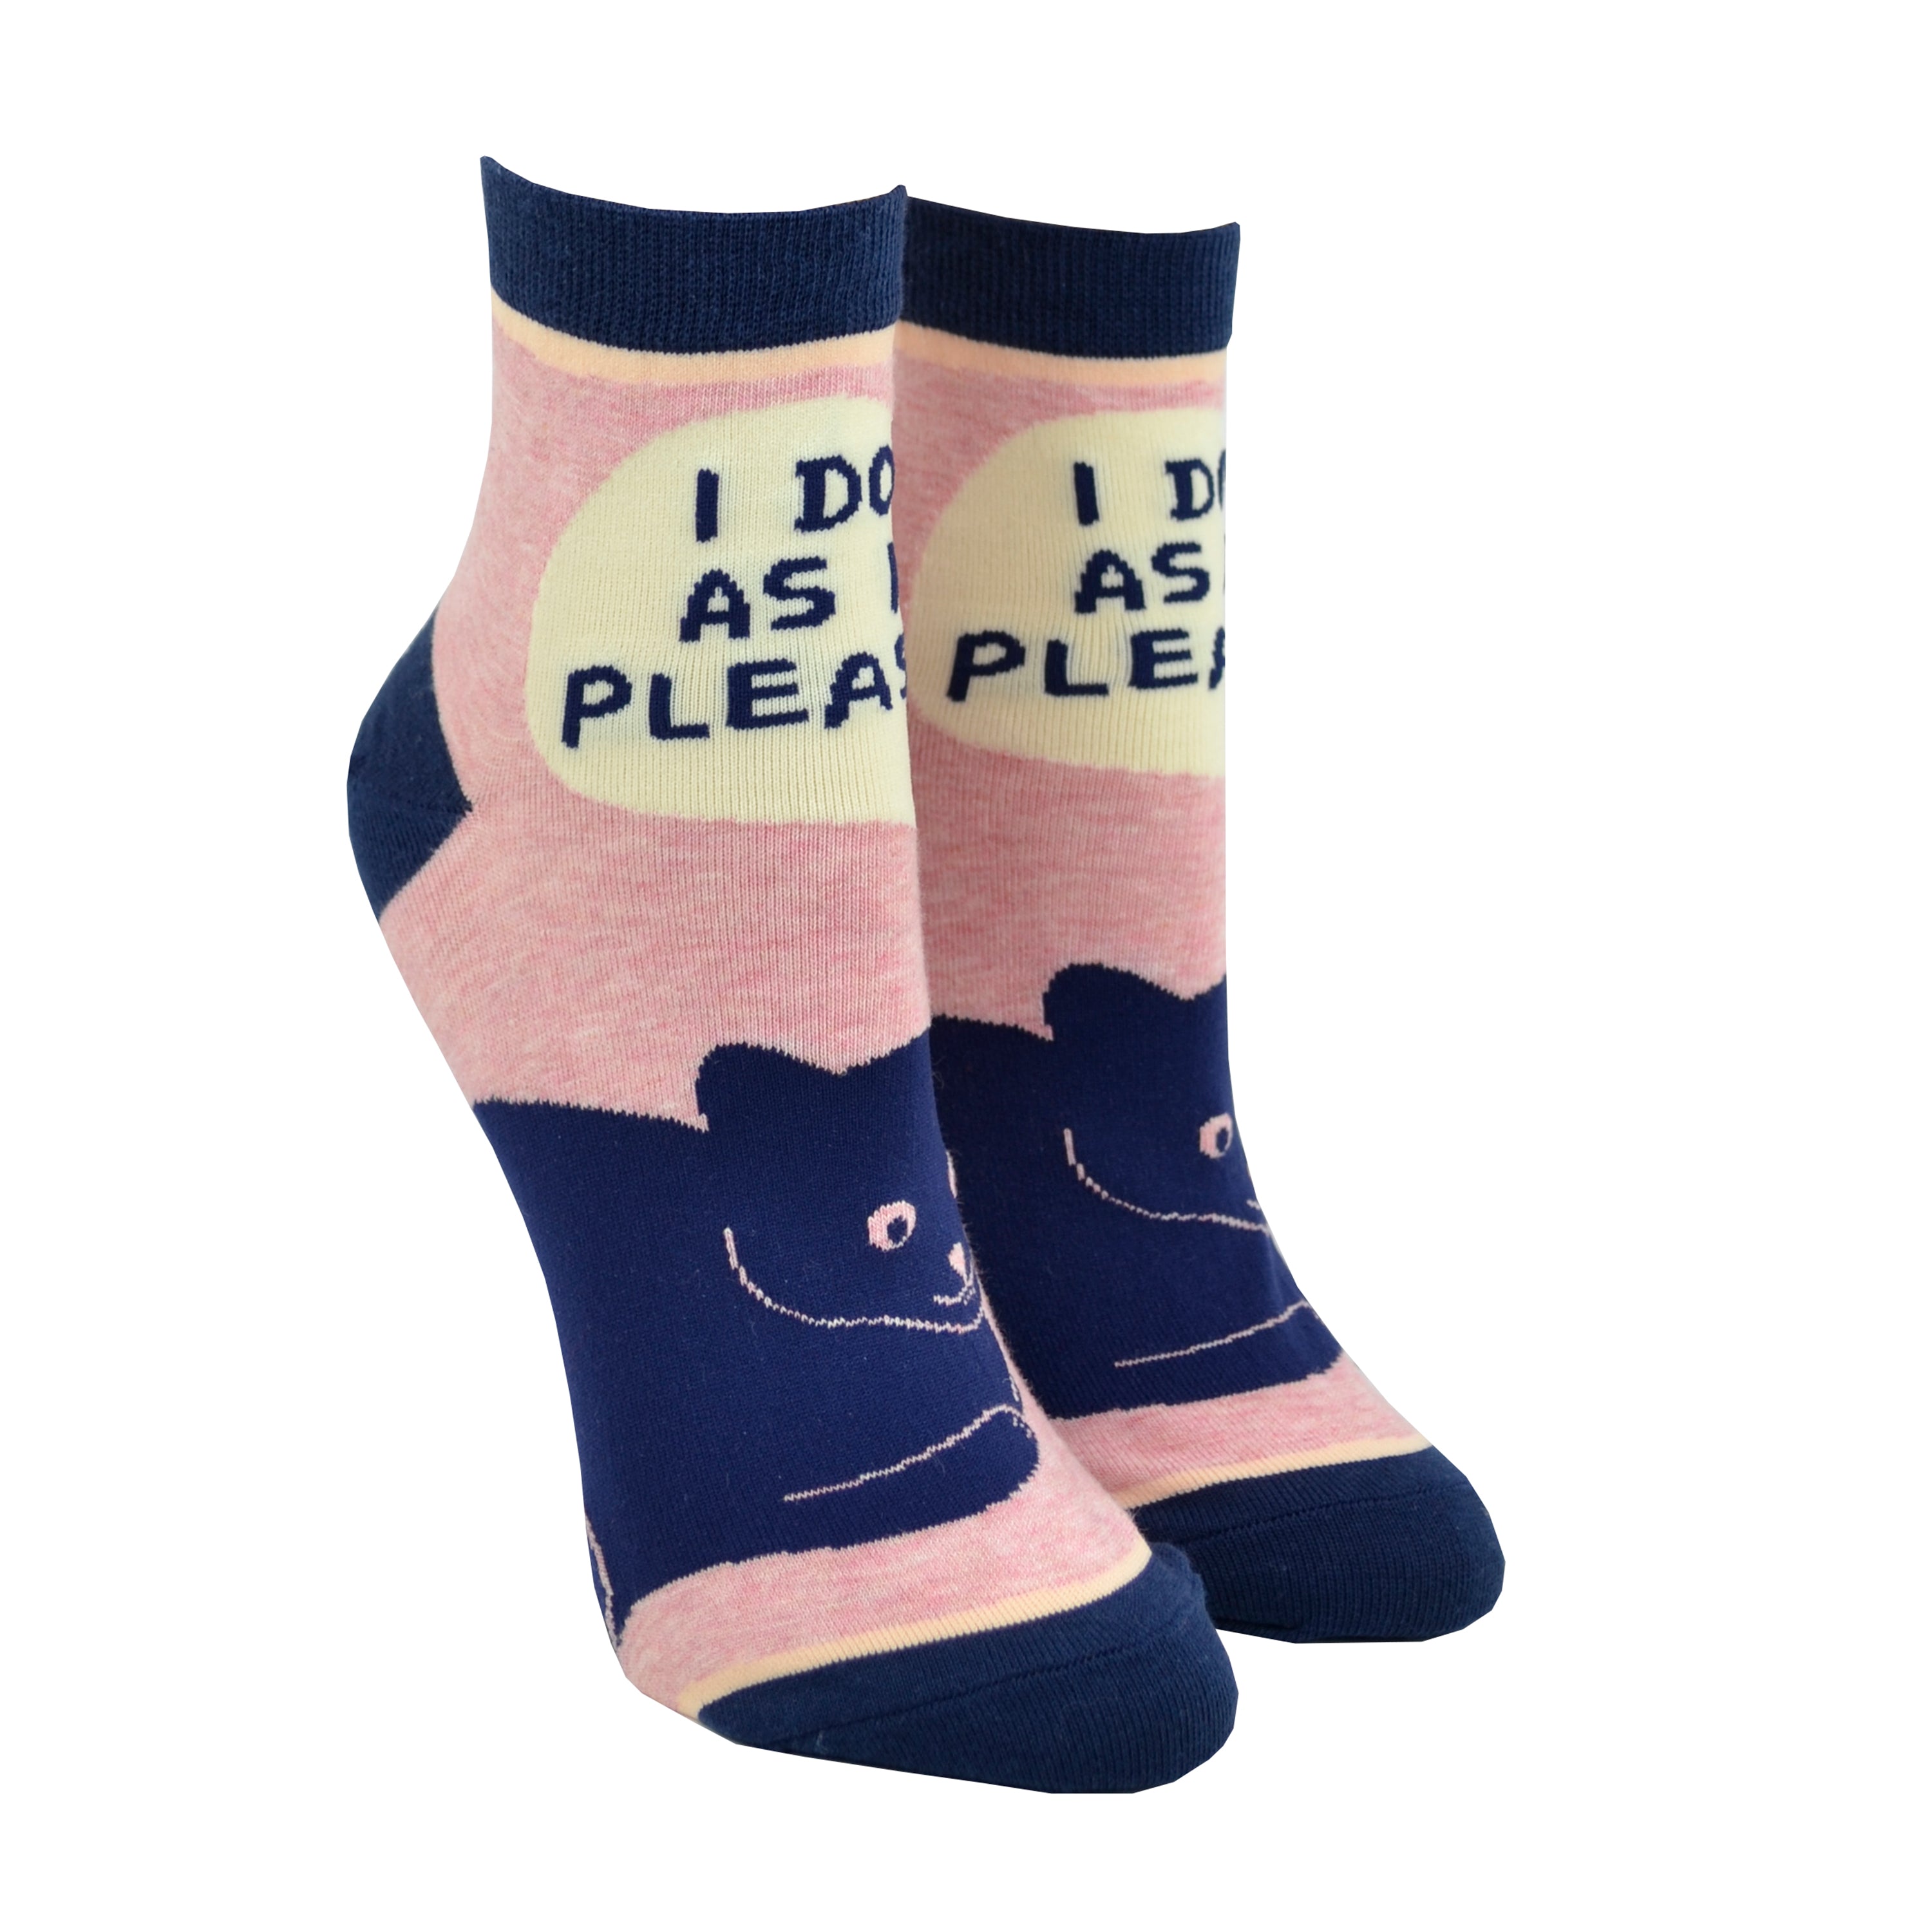 Shown on leg forms, a pair of Blue Q brand women's ankle socks in light pink with a navy blue heel, toe, and cuff. The sock features a blue cartoon cat on the foot with the phrase, 